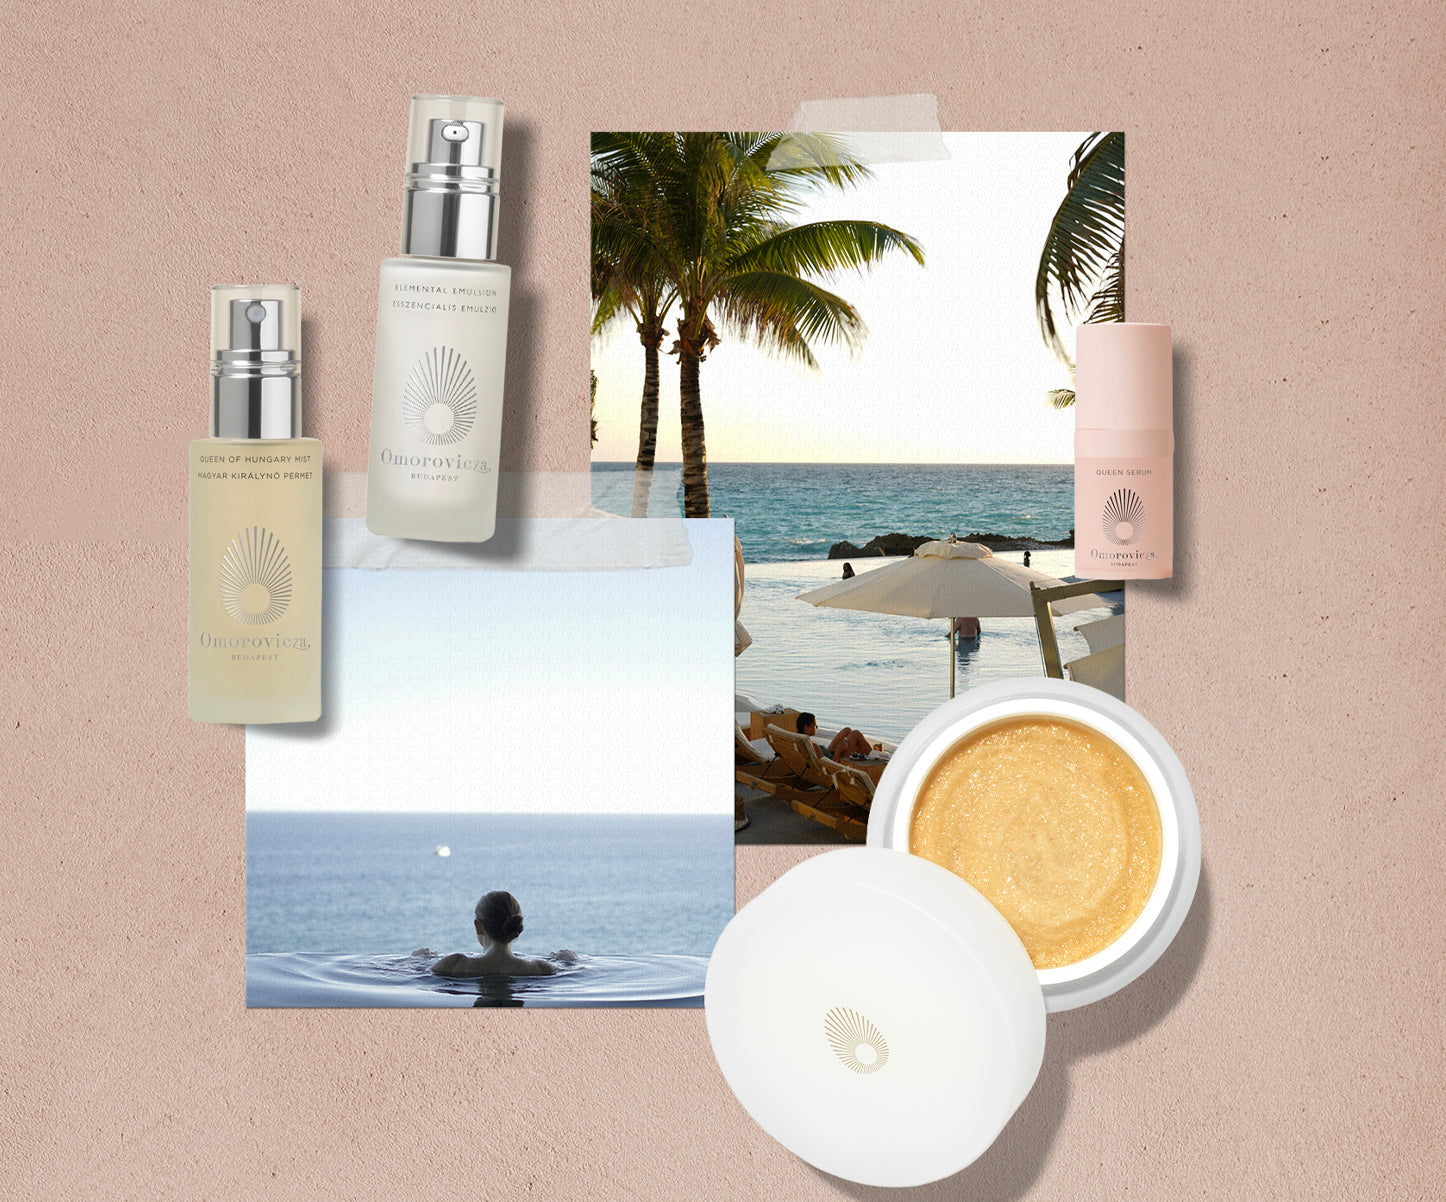 Travel Skincare Minis to Pack for Any Type of Destination